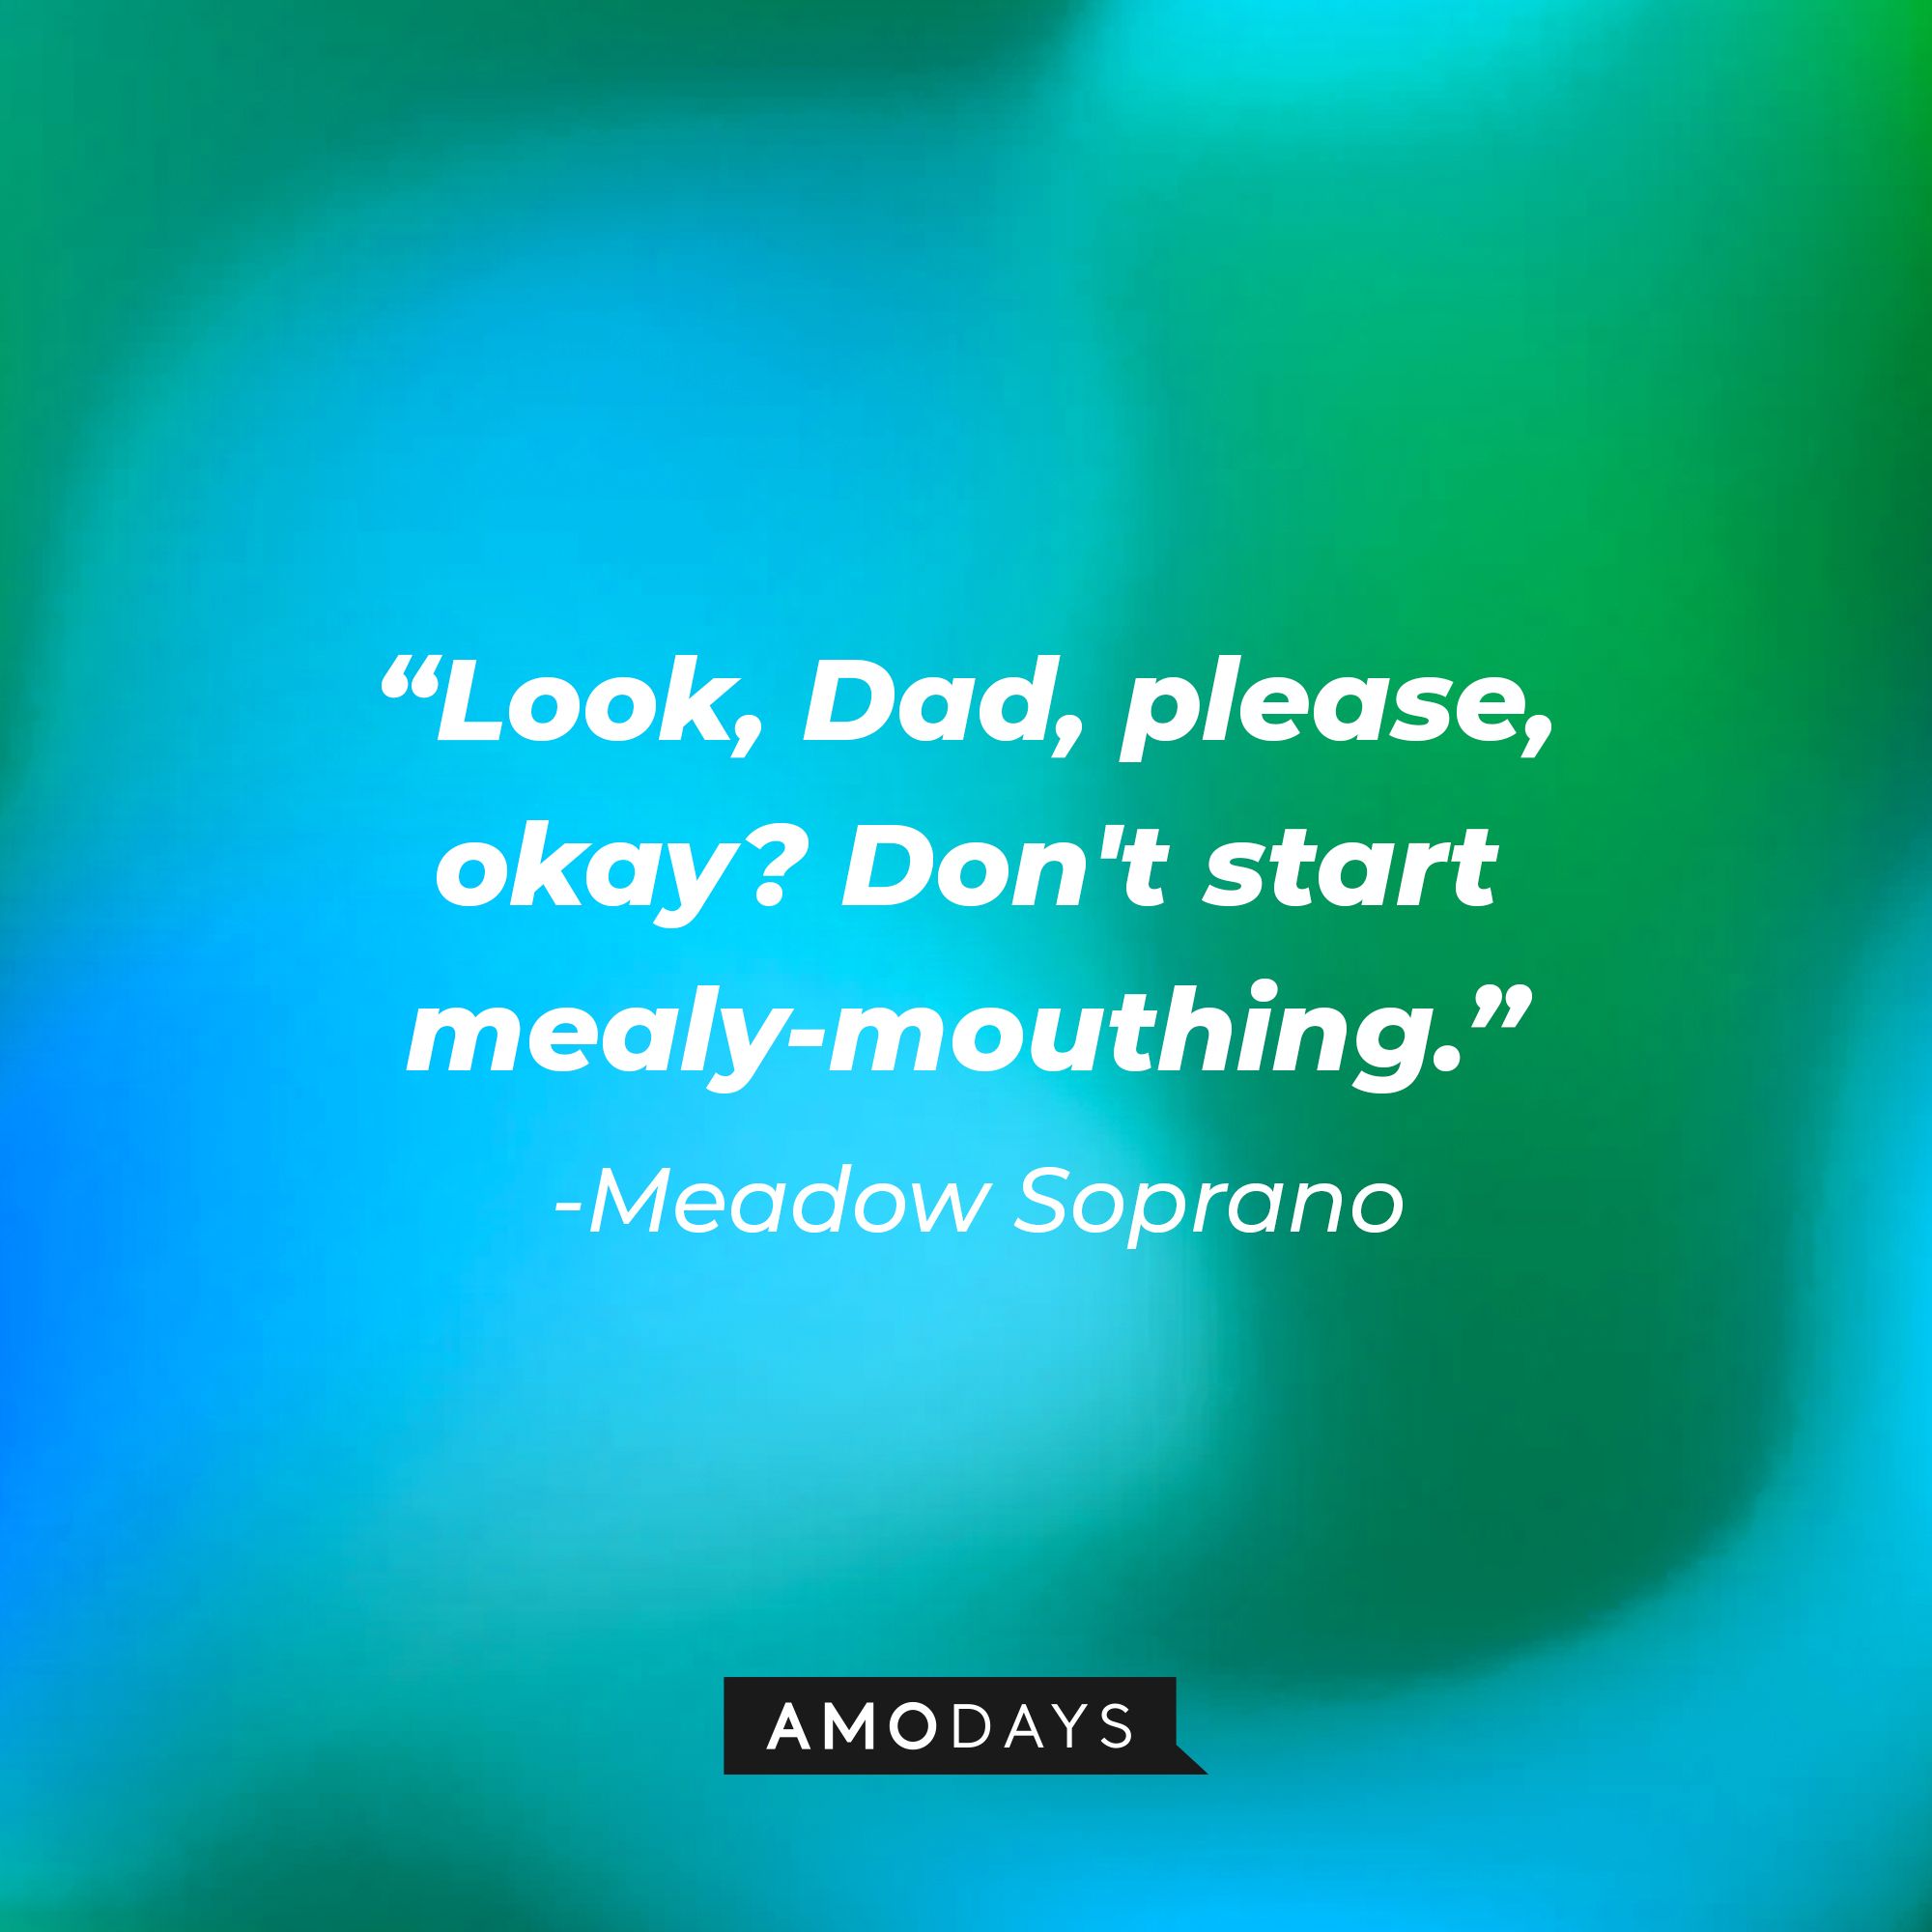 Meadow Soprano’s quote: “Look, Dad, please, okay? Don't start mealy-mouthing.” | Source: AmoDays